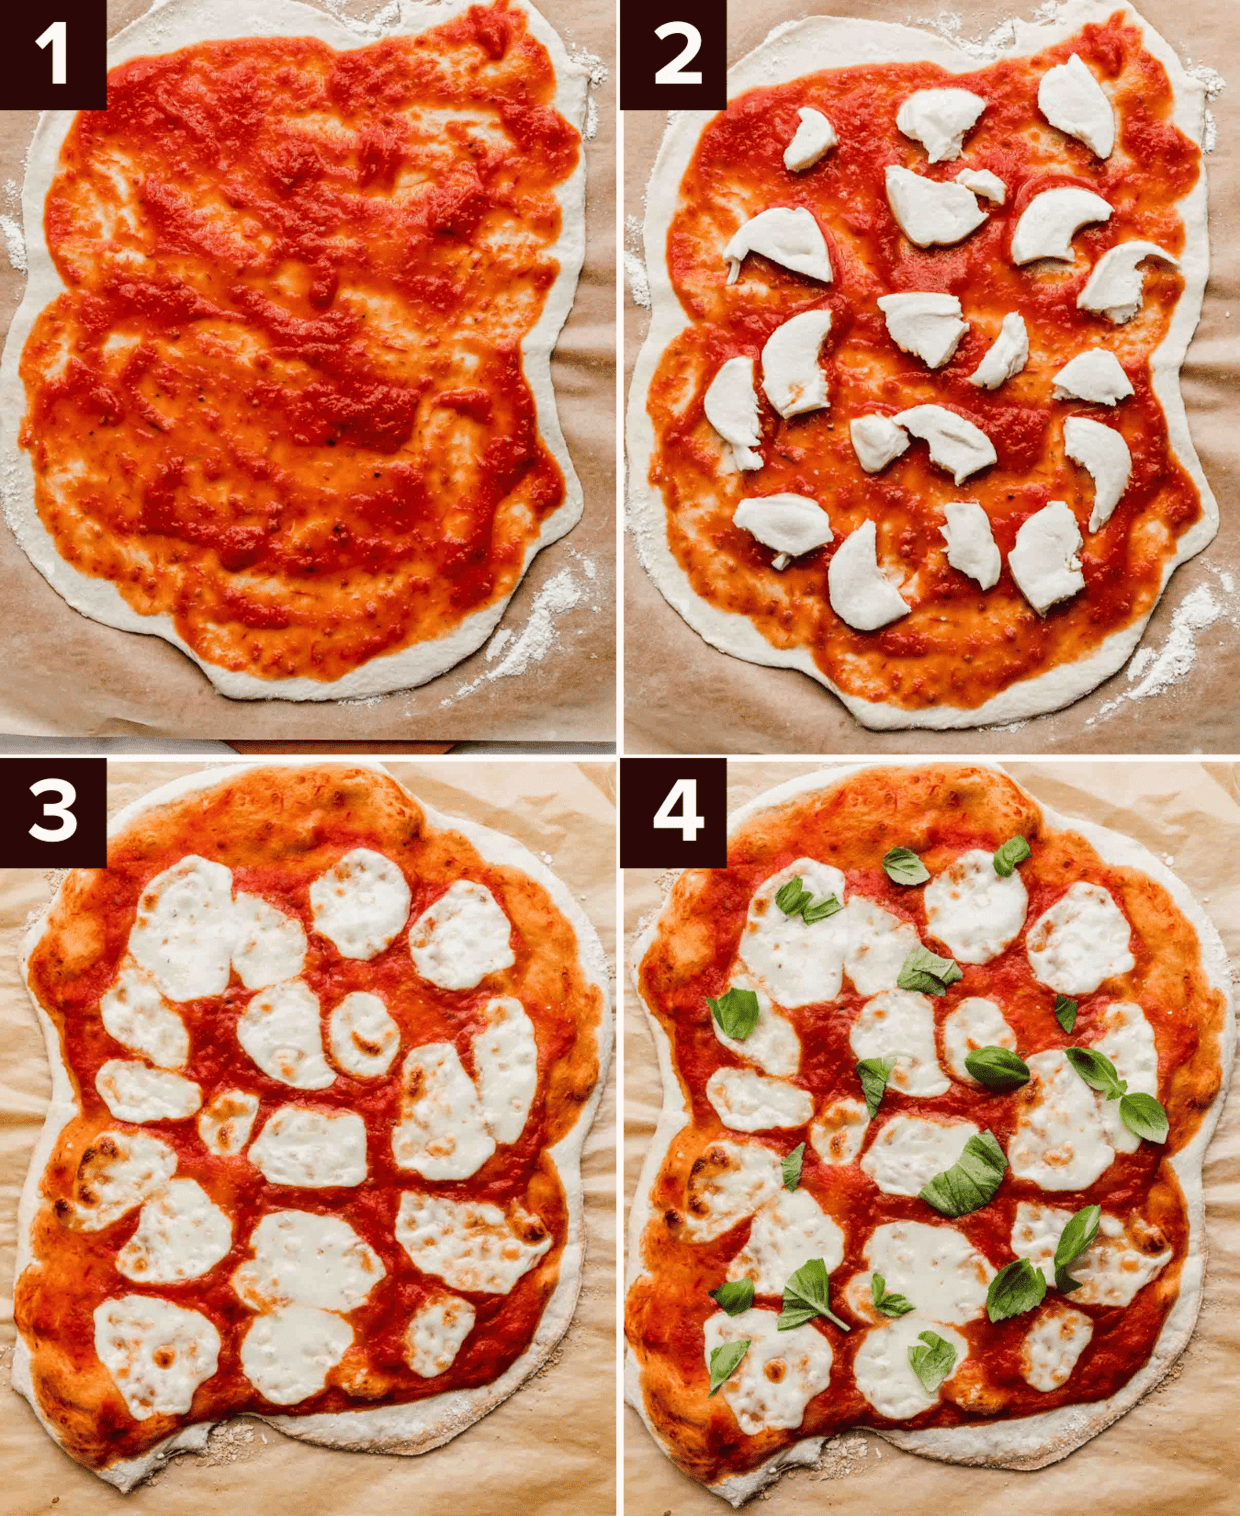 Four images showing the process of how to make an Authentic Margherita Pizza, using canned crushed tomatoes, fresh mozzarella, and fresh basil.